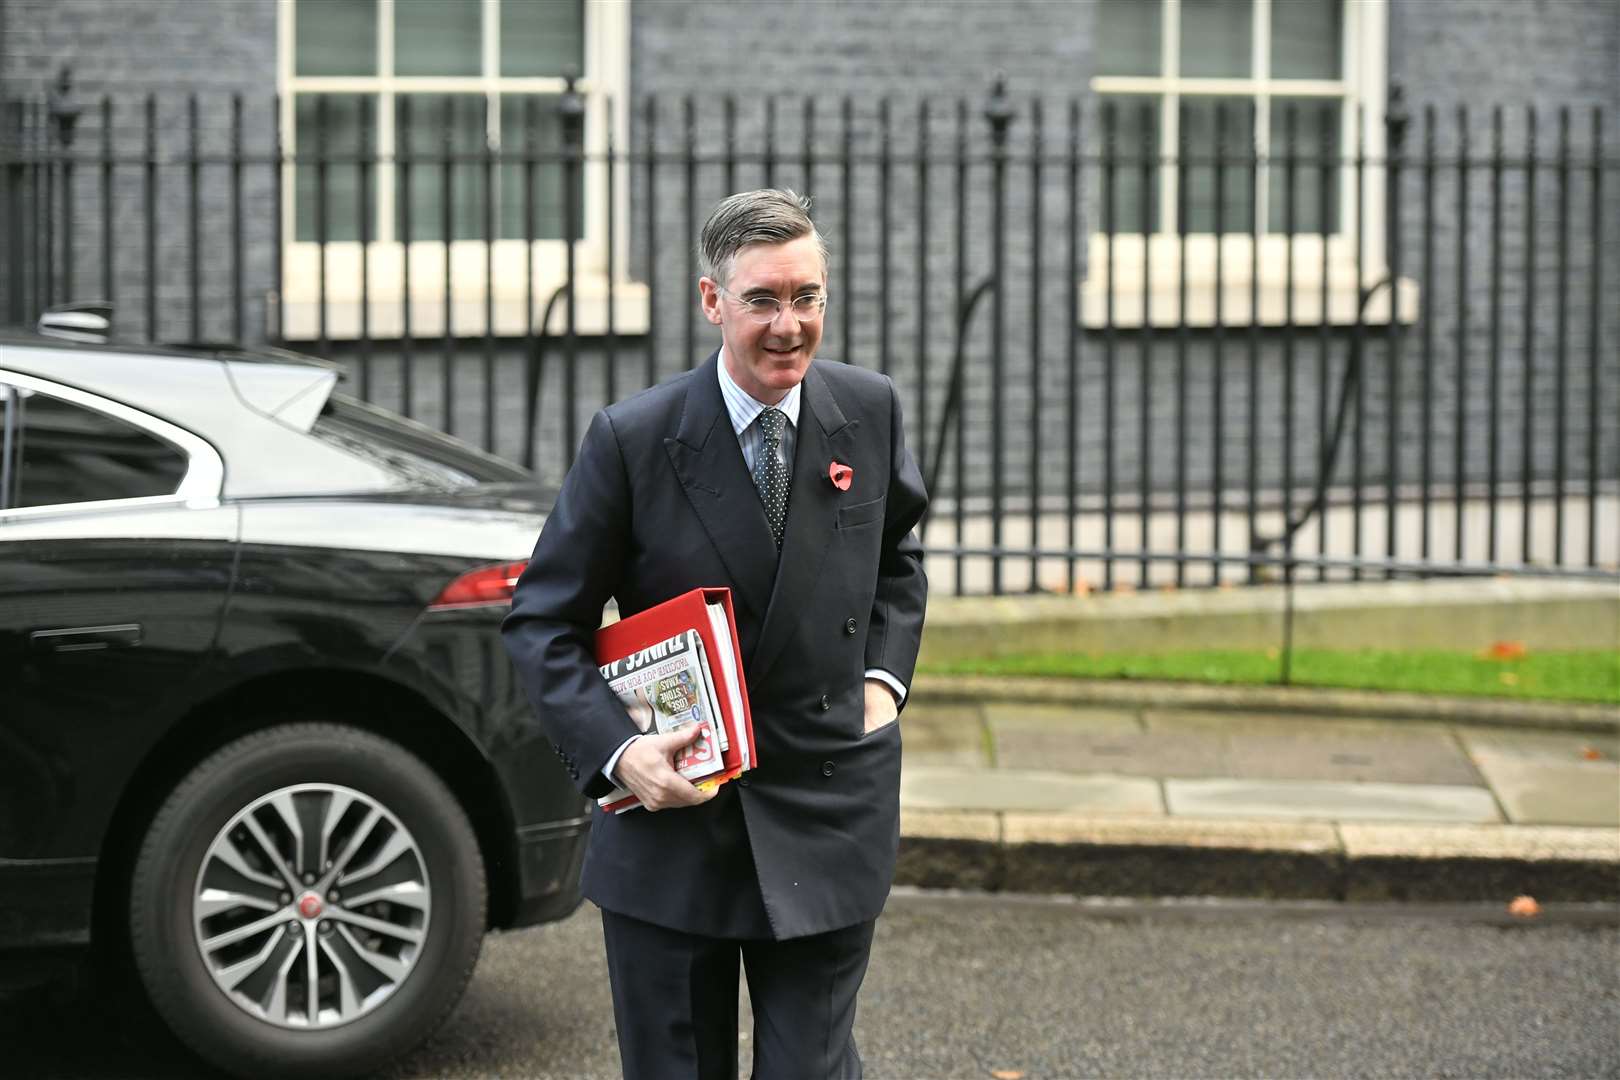 Leader of the House of Commons Jacob Rees-Mogg in Downing Street (Dominic Lipinski/PA)